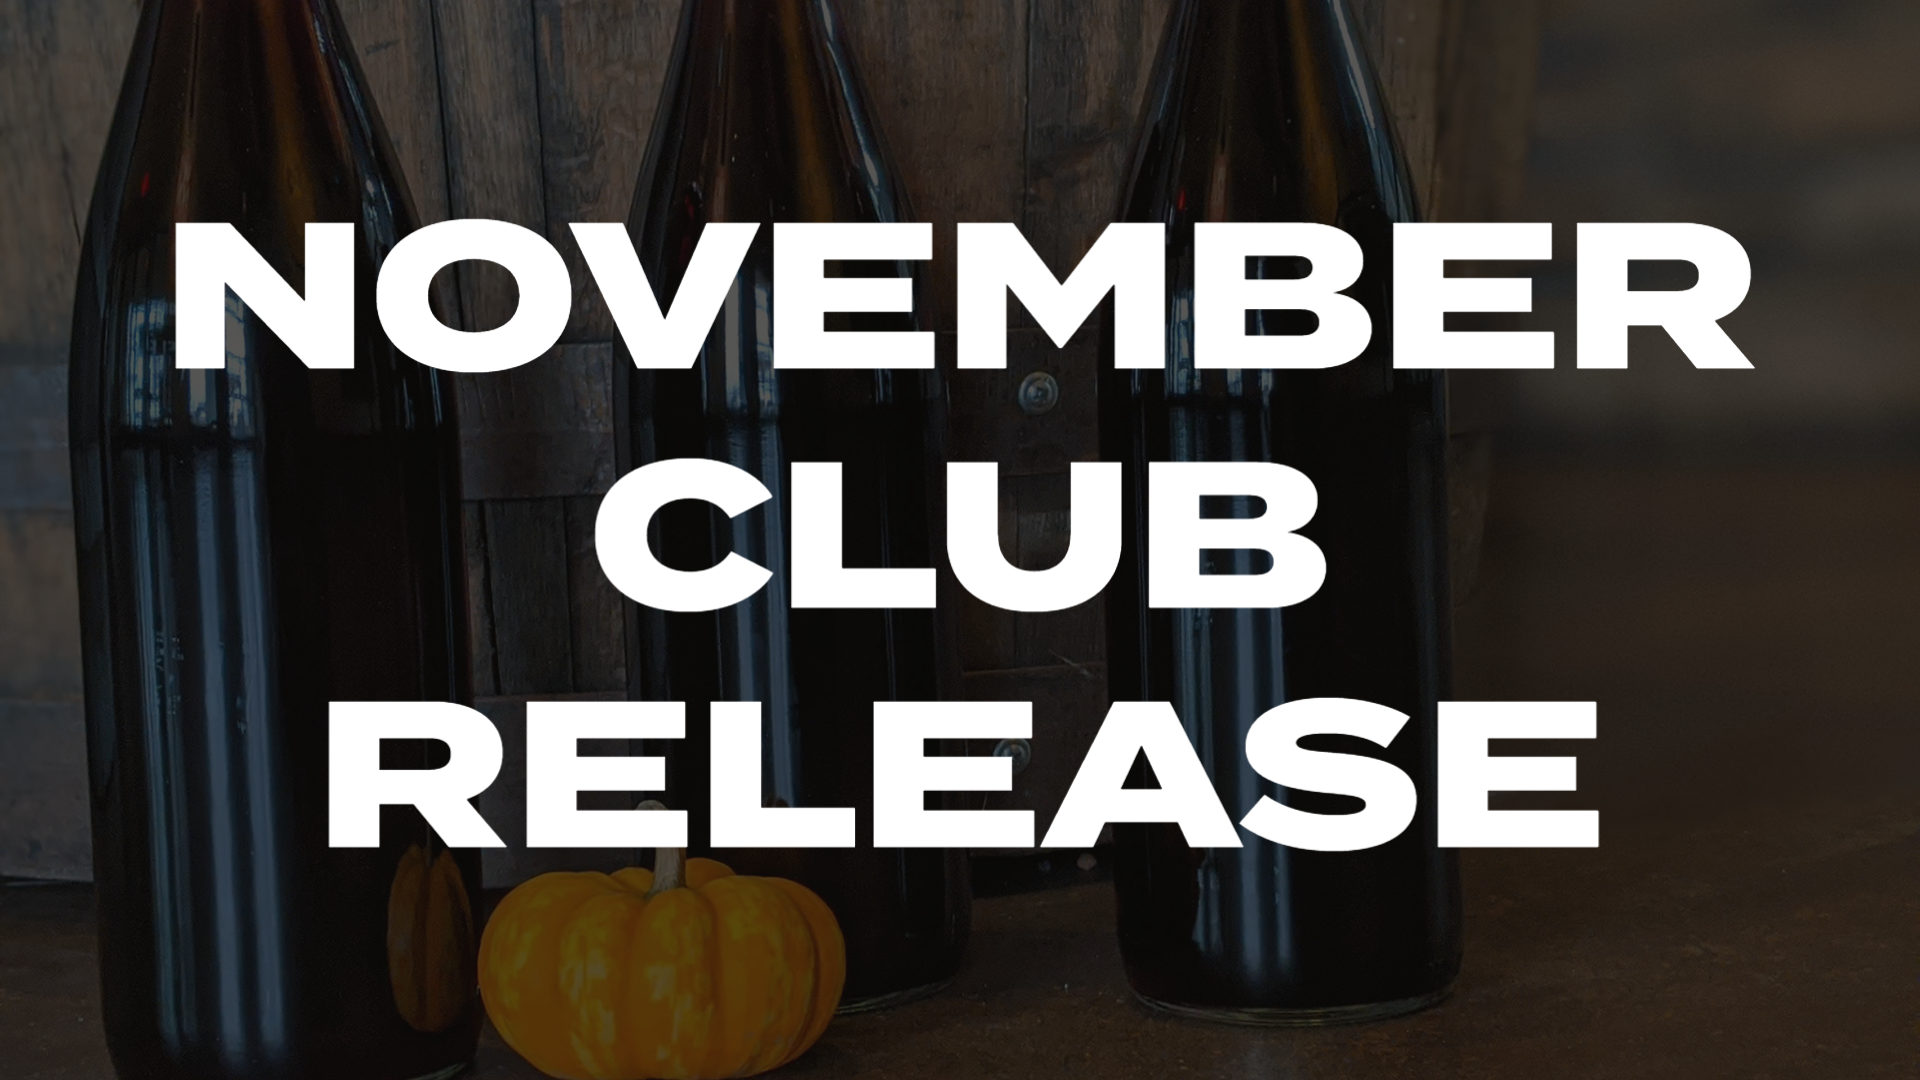 You are currently viewing NOVEMBER CLUB RELEASE